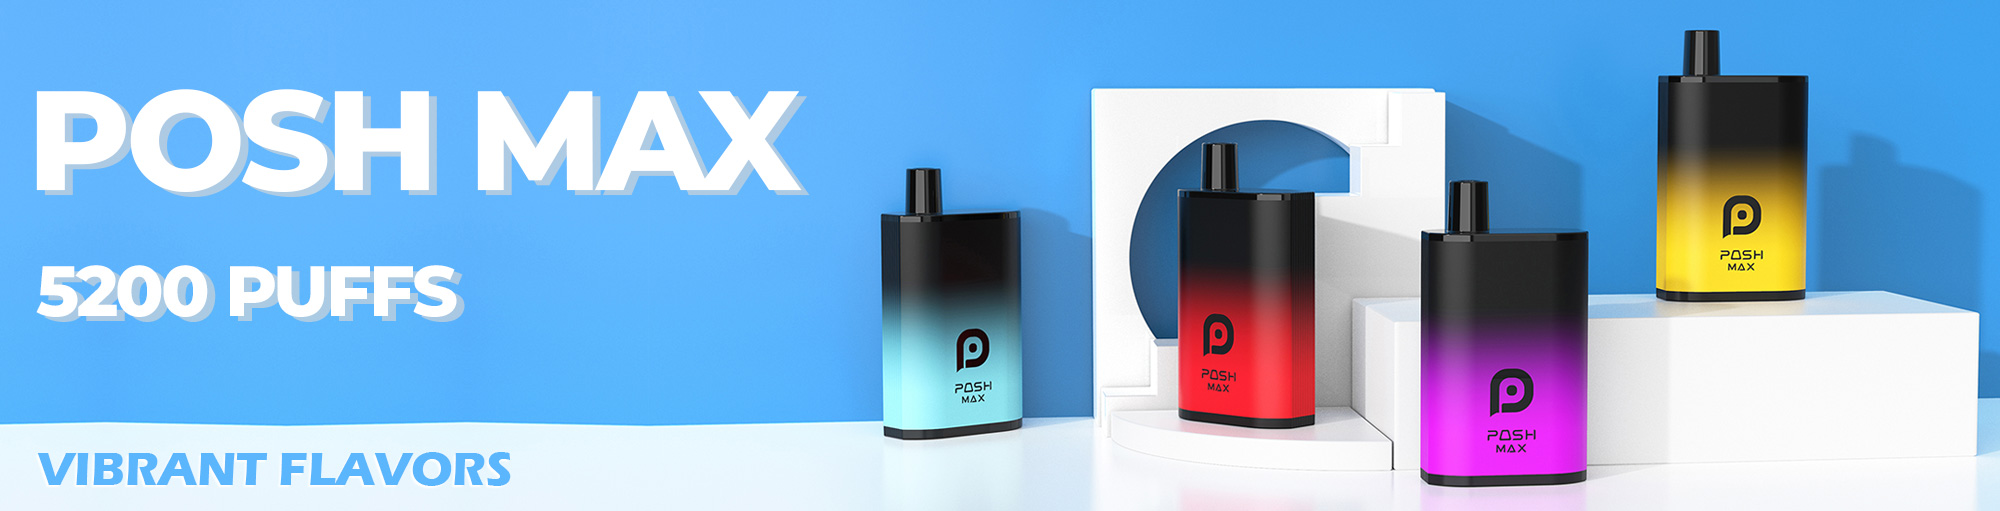 Posh Max 5200 PUFFS Synthetic-Disposable Vape Pod System